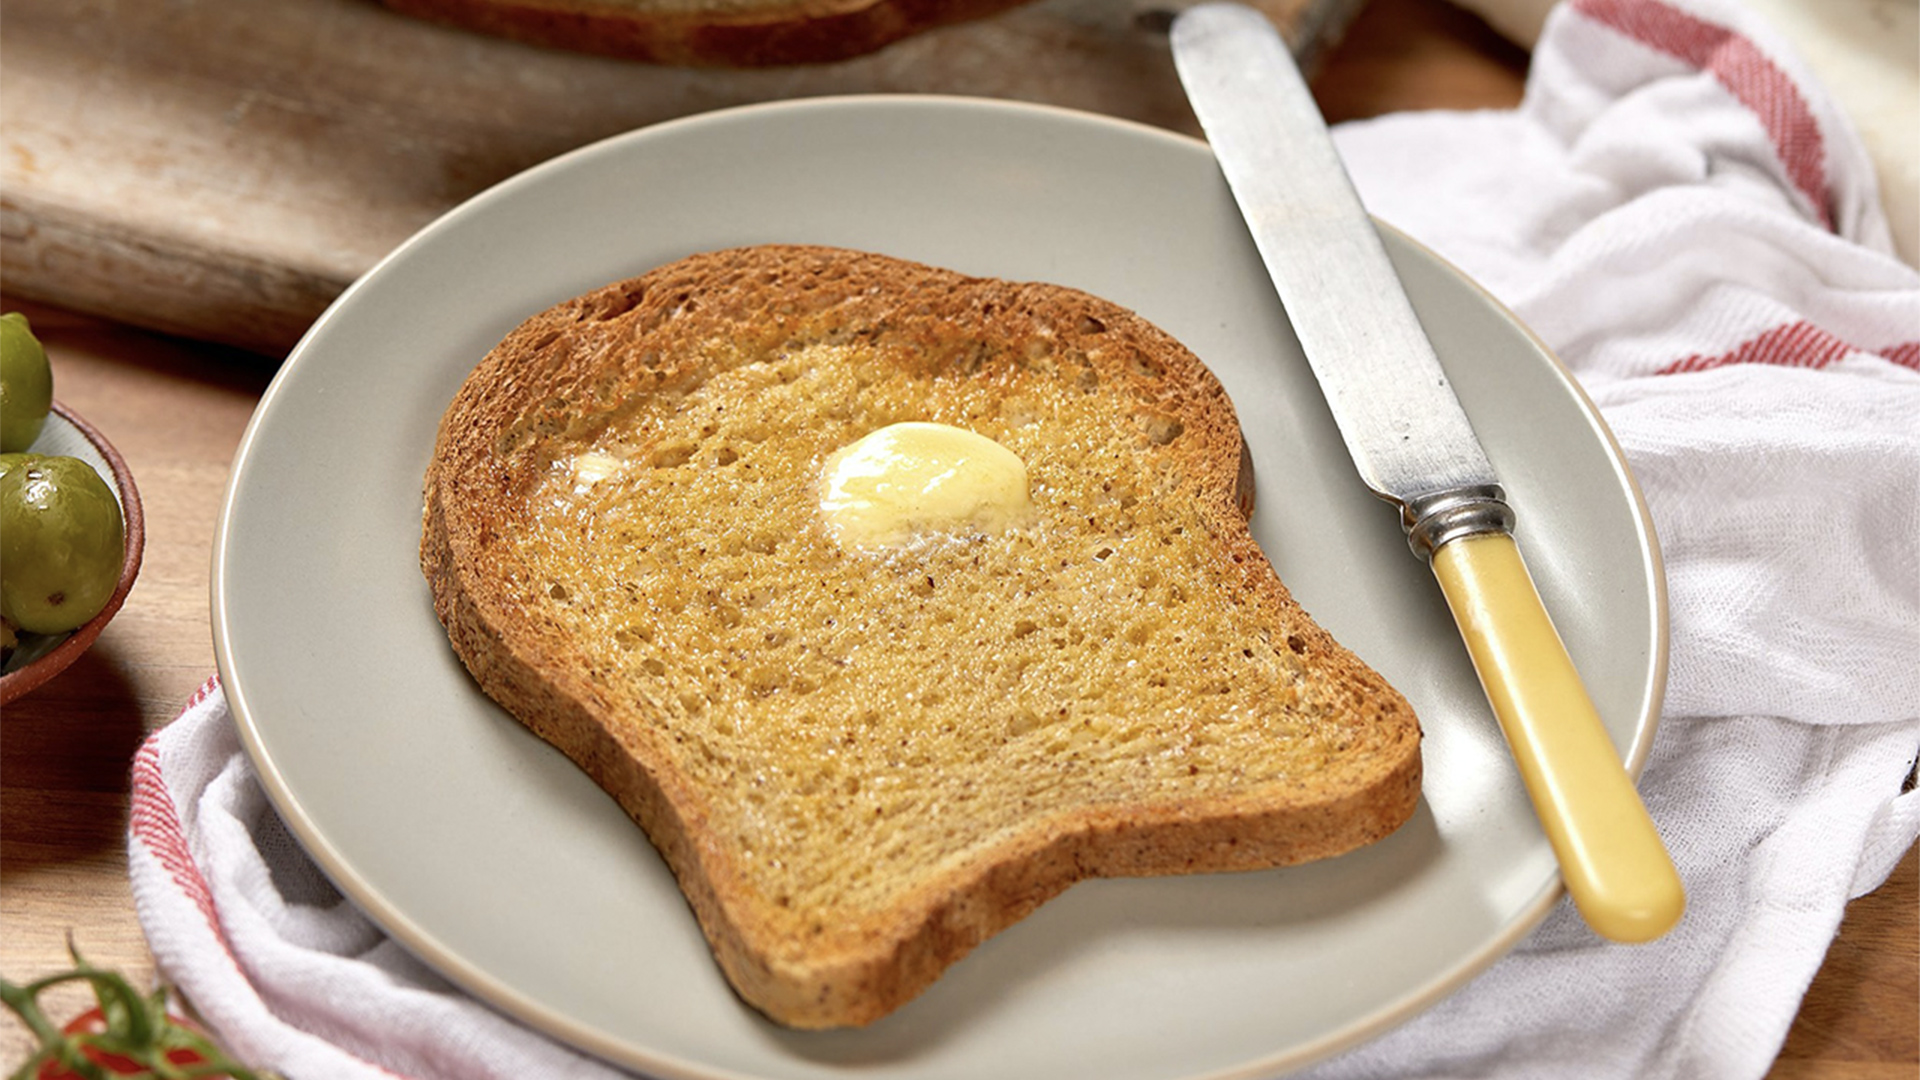 Buttered toast on a plate